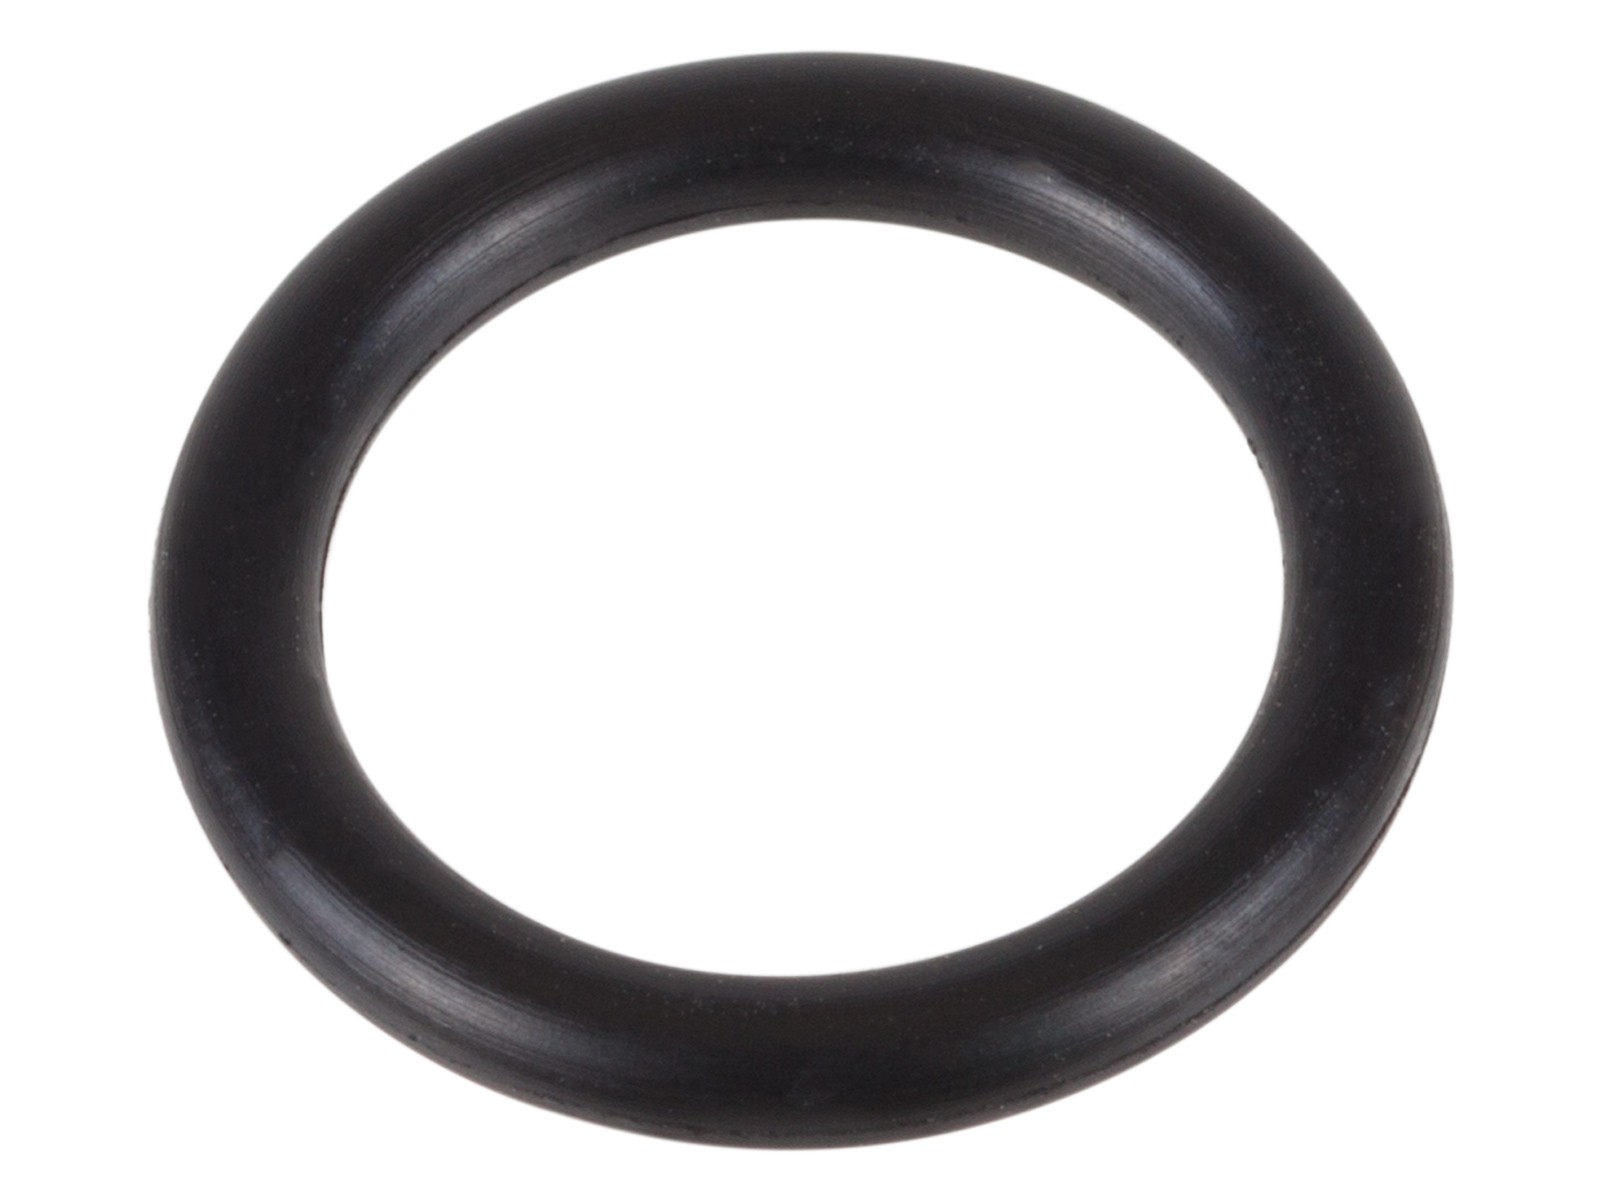 Pump Piston O-Ring For Weihrauch HW75 and Beeman P2